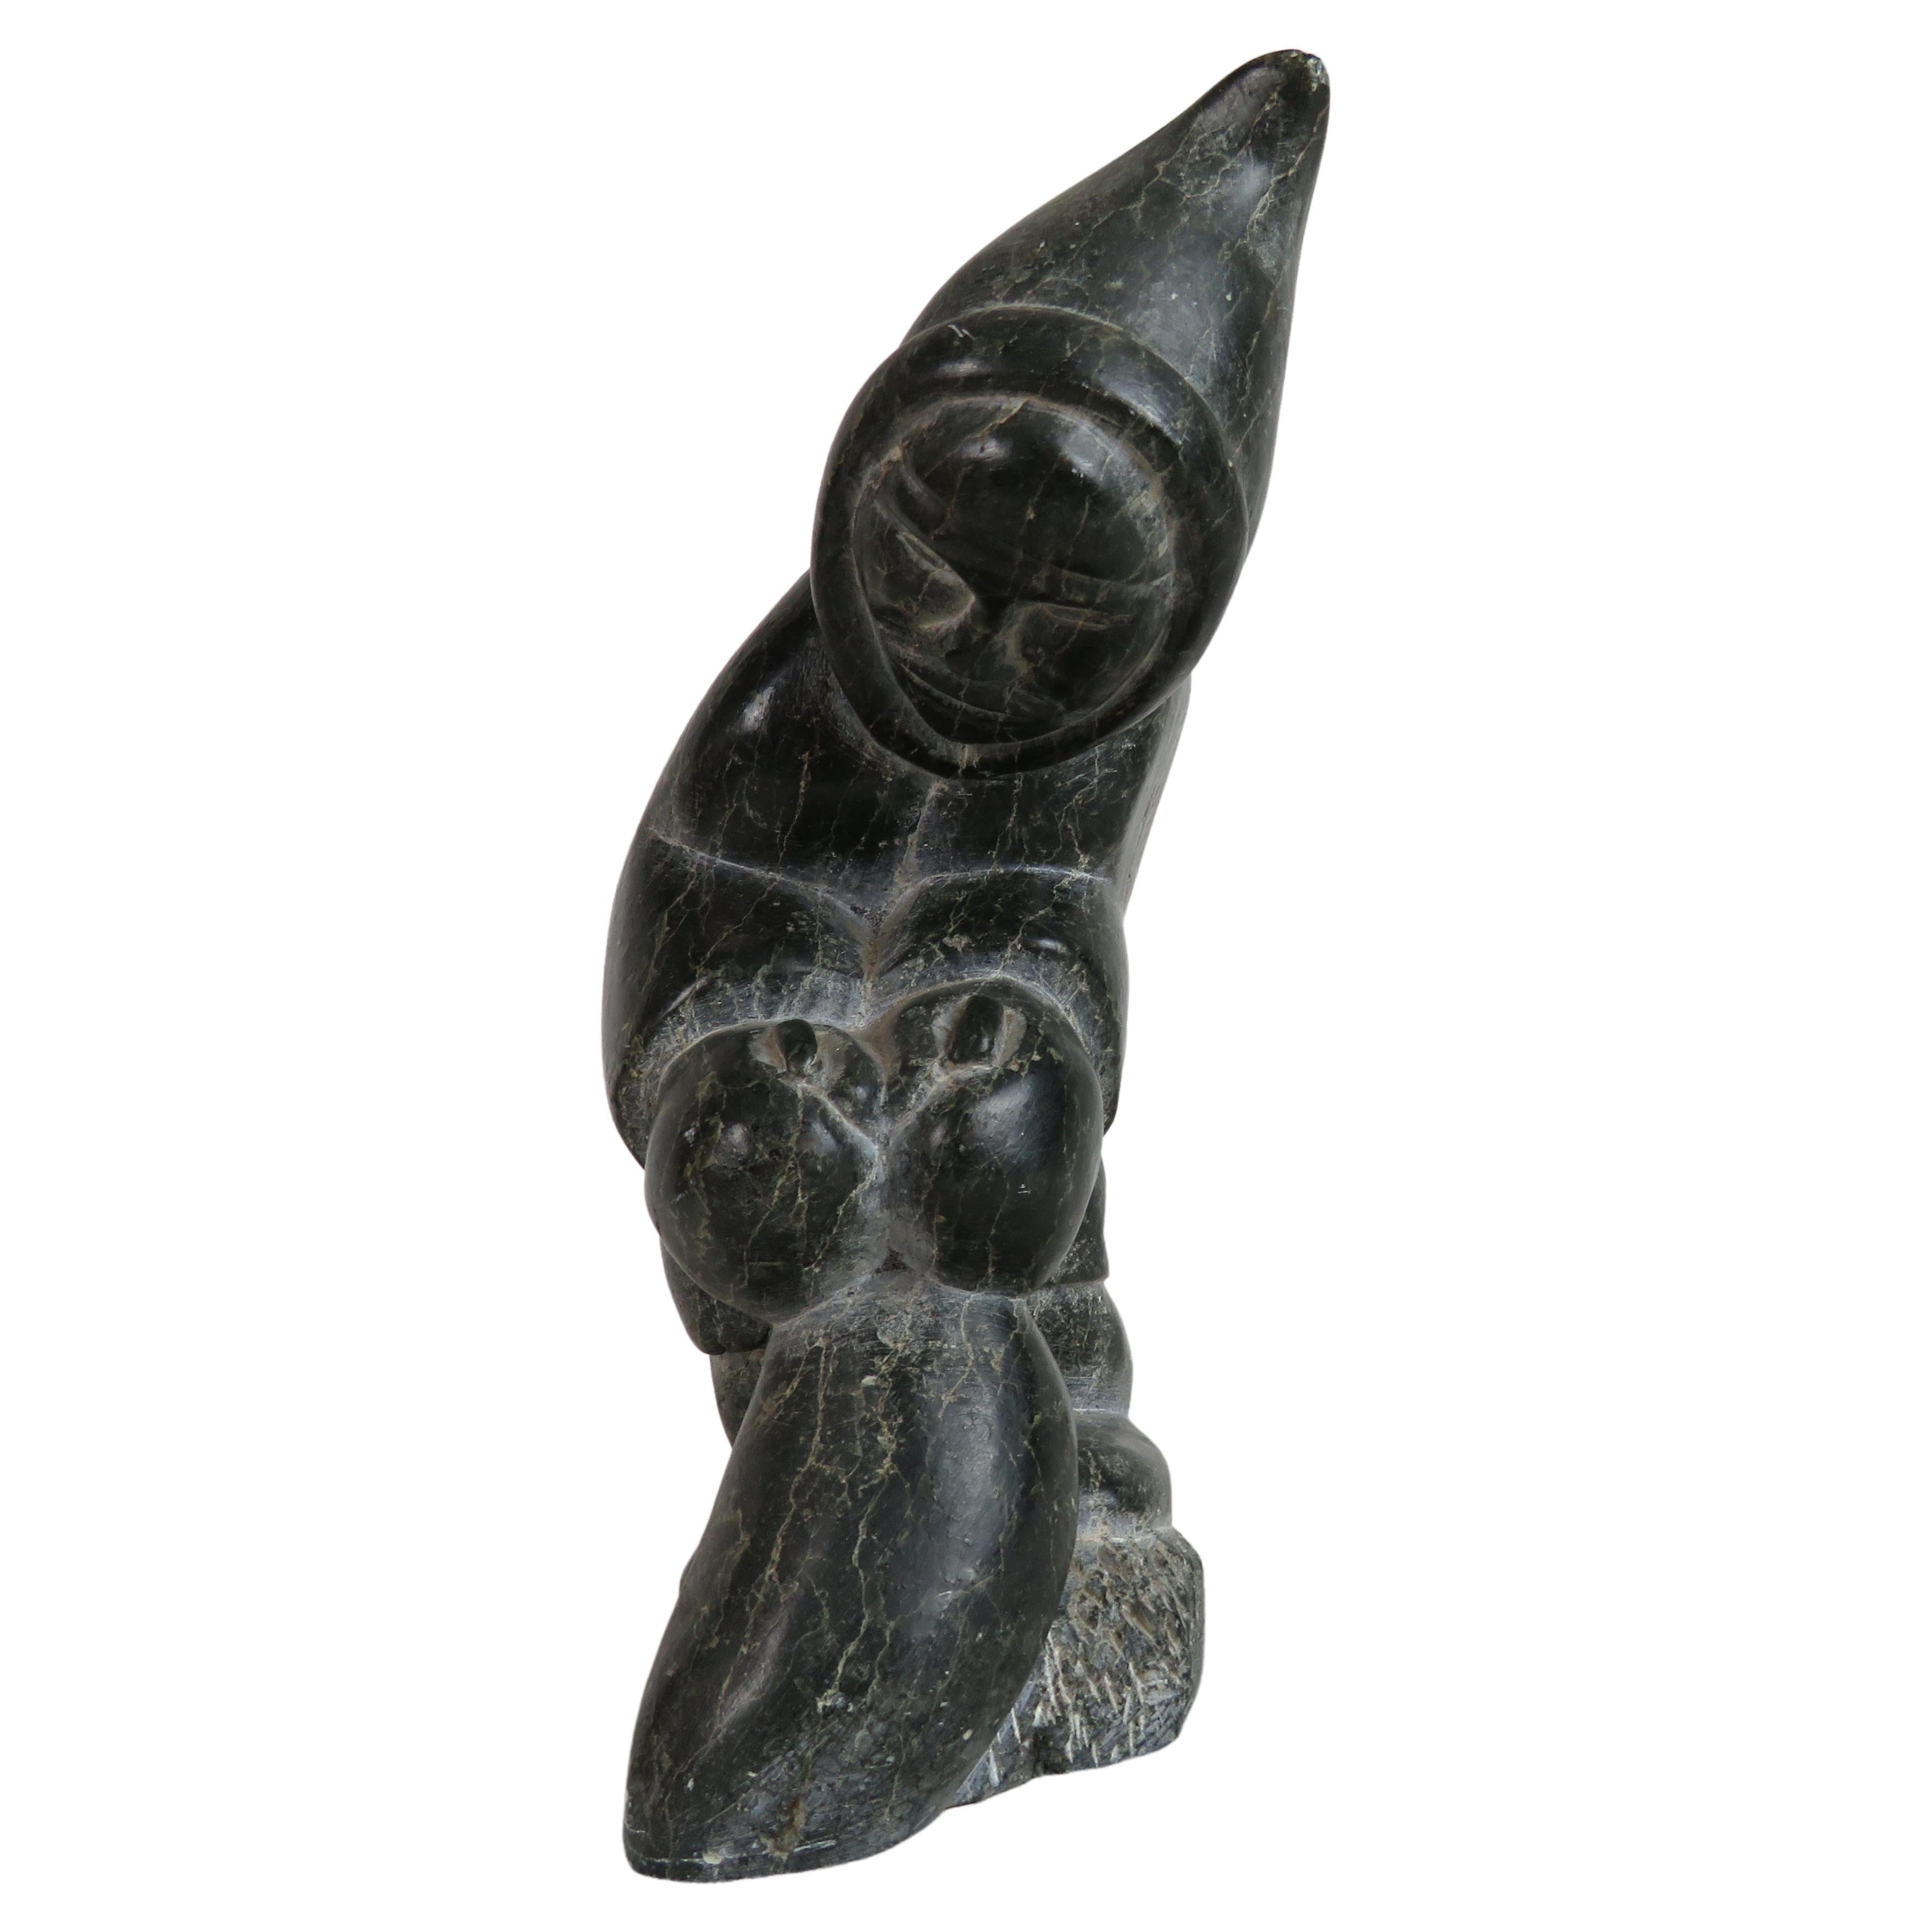 Carved Soapstone Sculpture of an Inuit Leaning Forward, Holding Bag at Feet For Sale